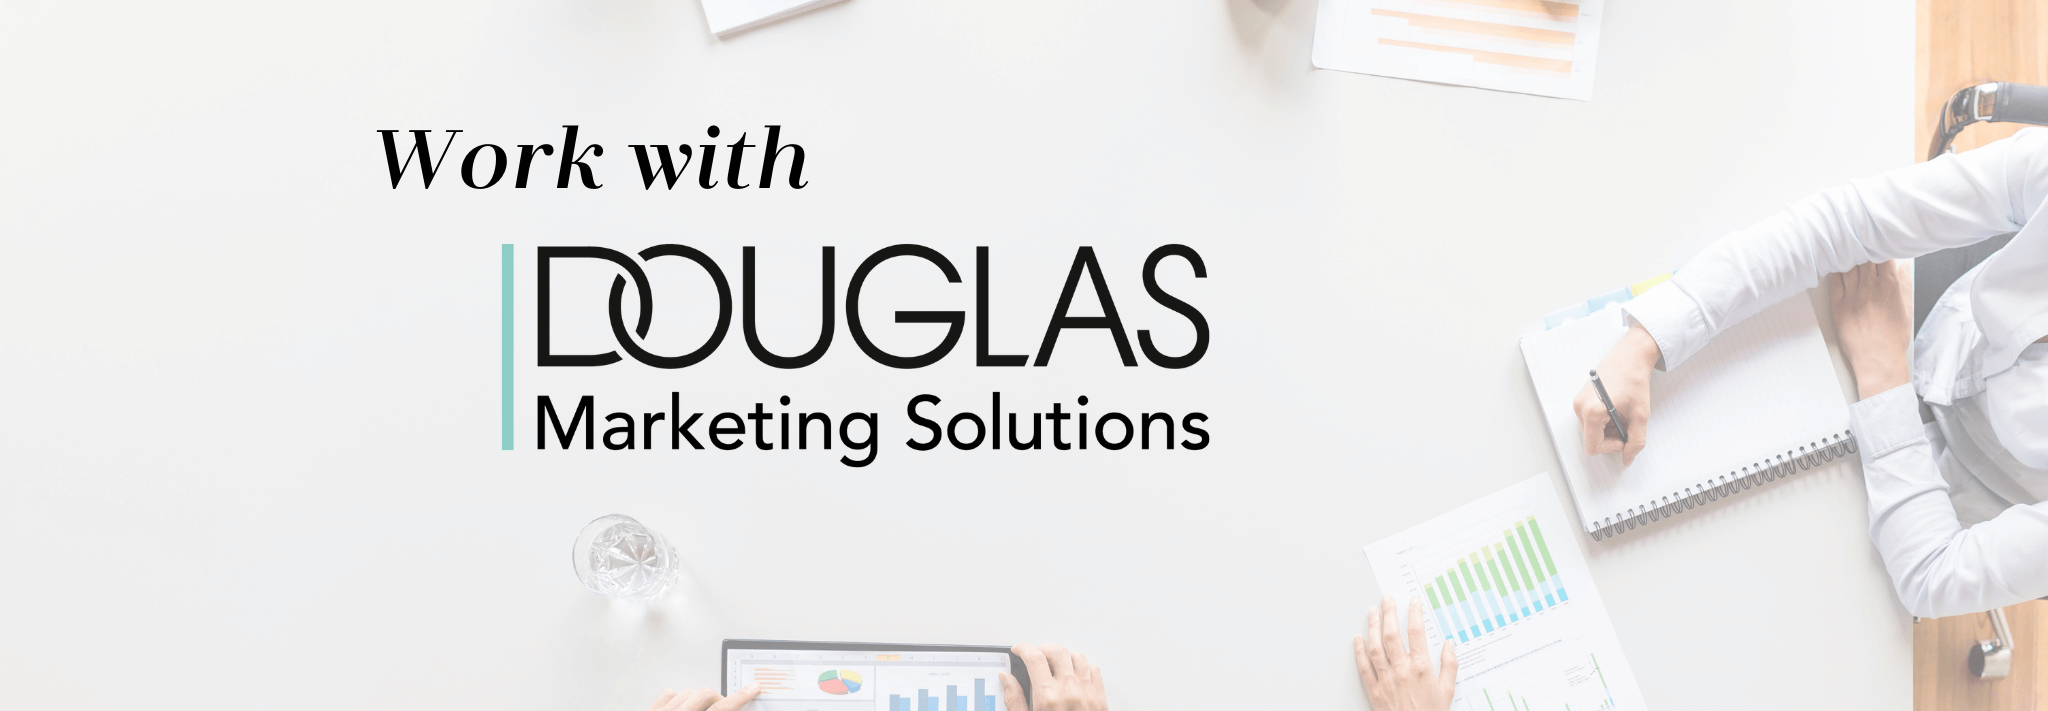 Header - Work with Douglas Marketing Solutions